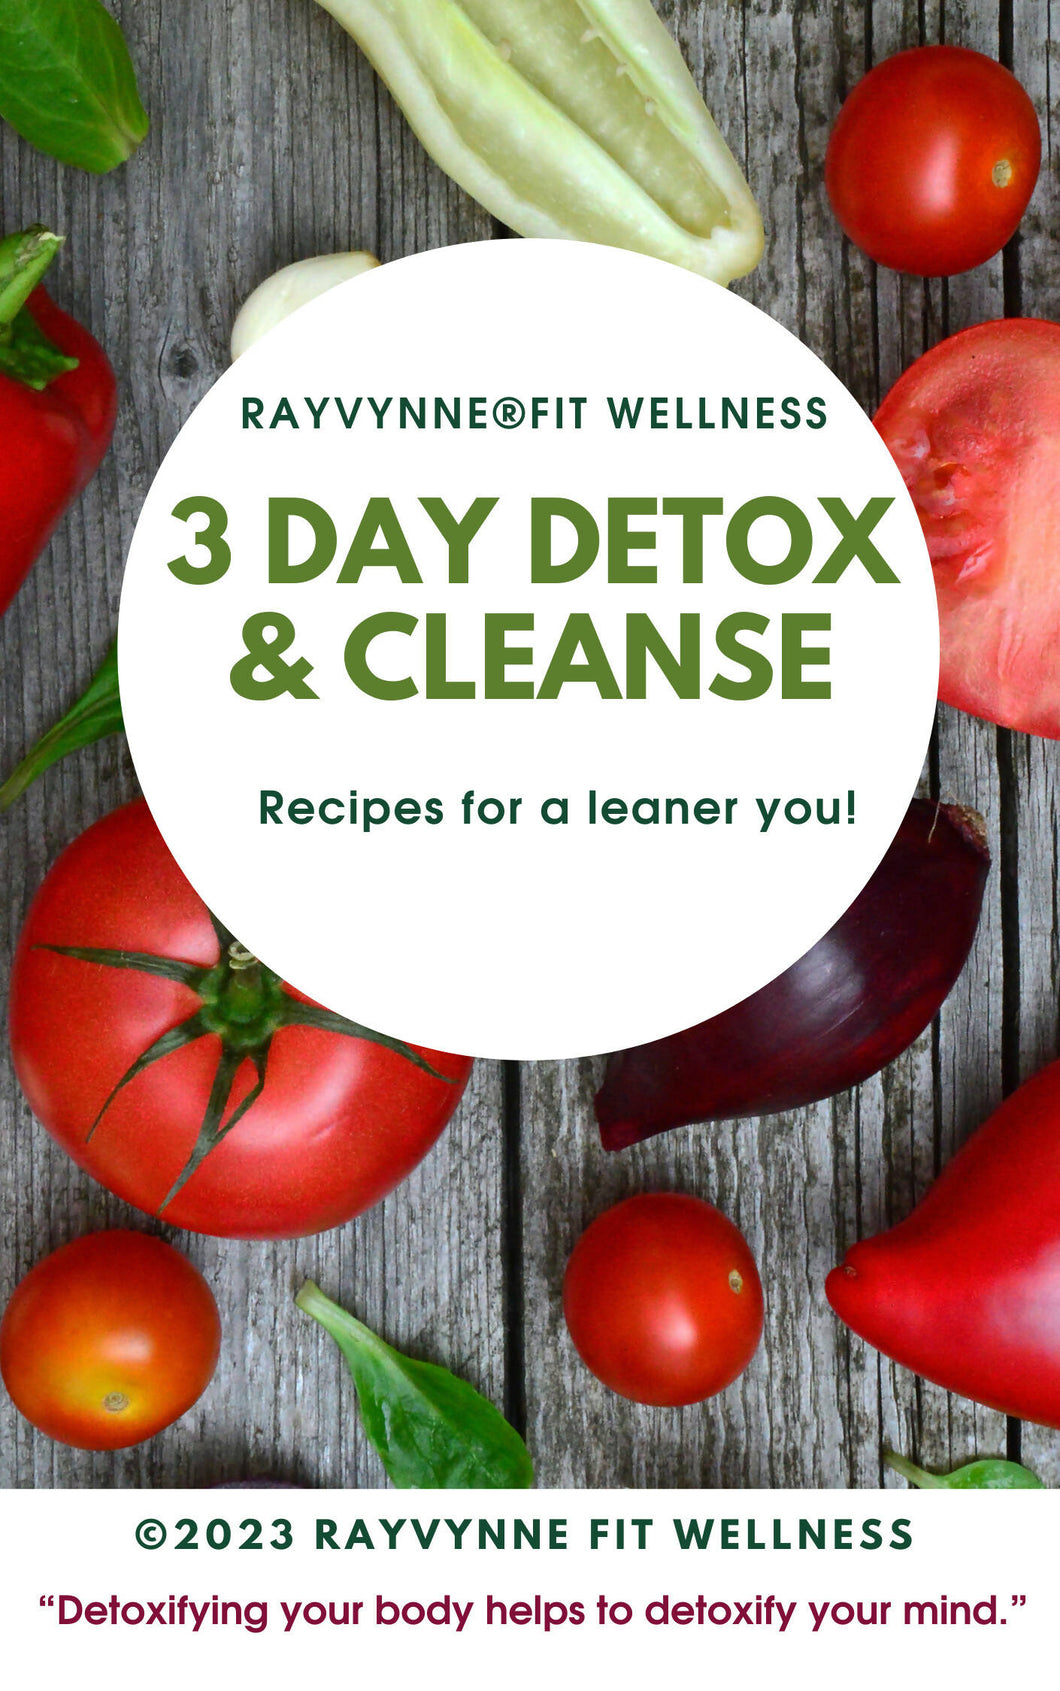 3 Day Detox & Cleanse